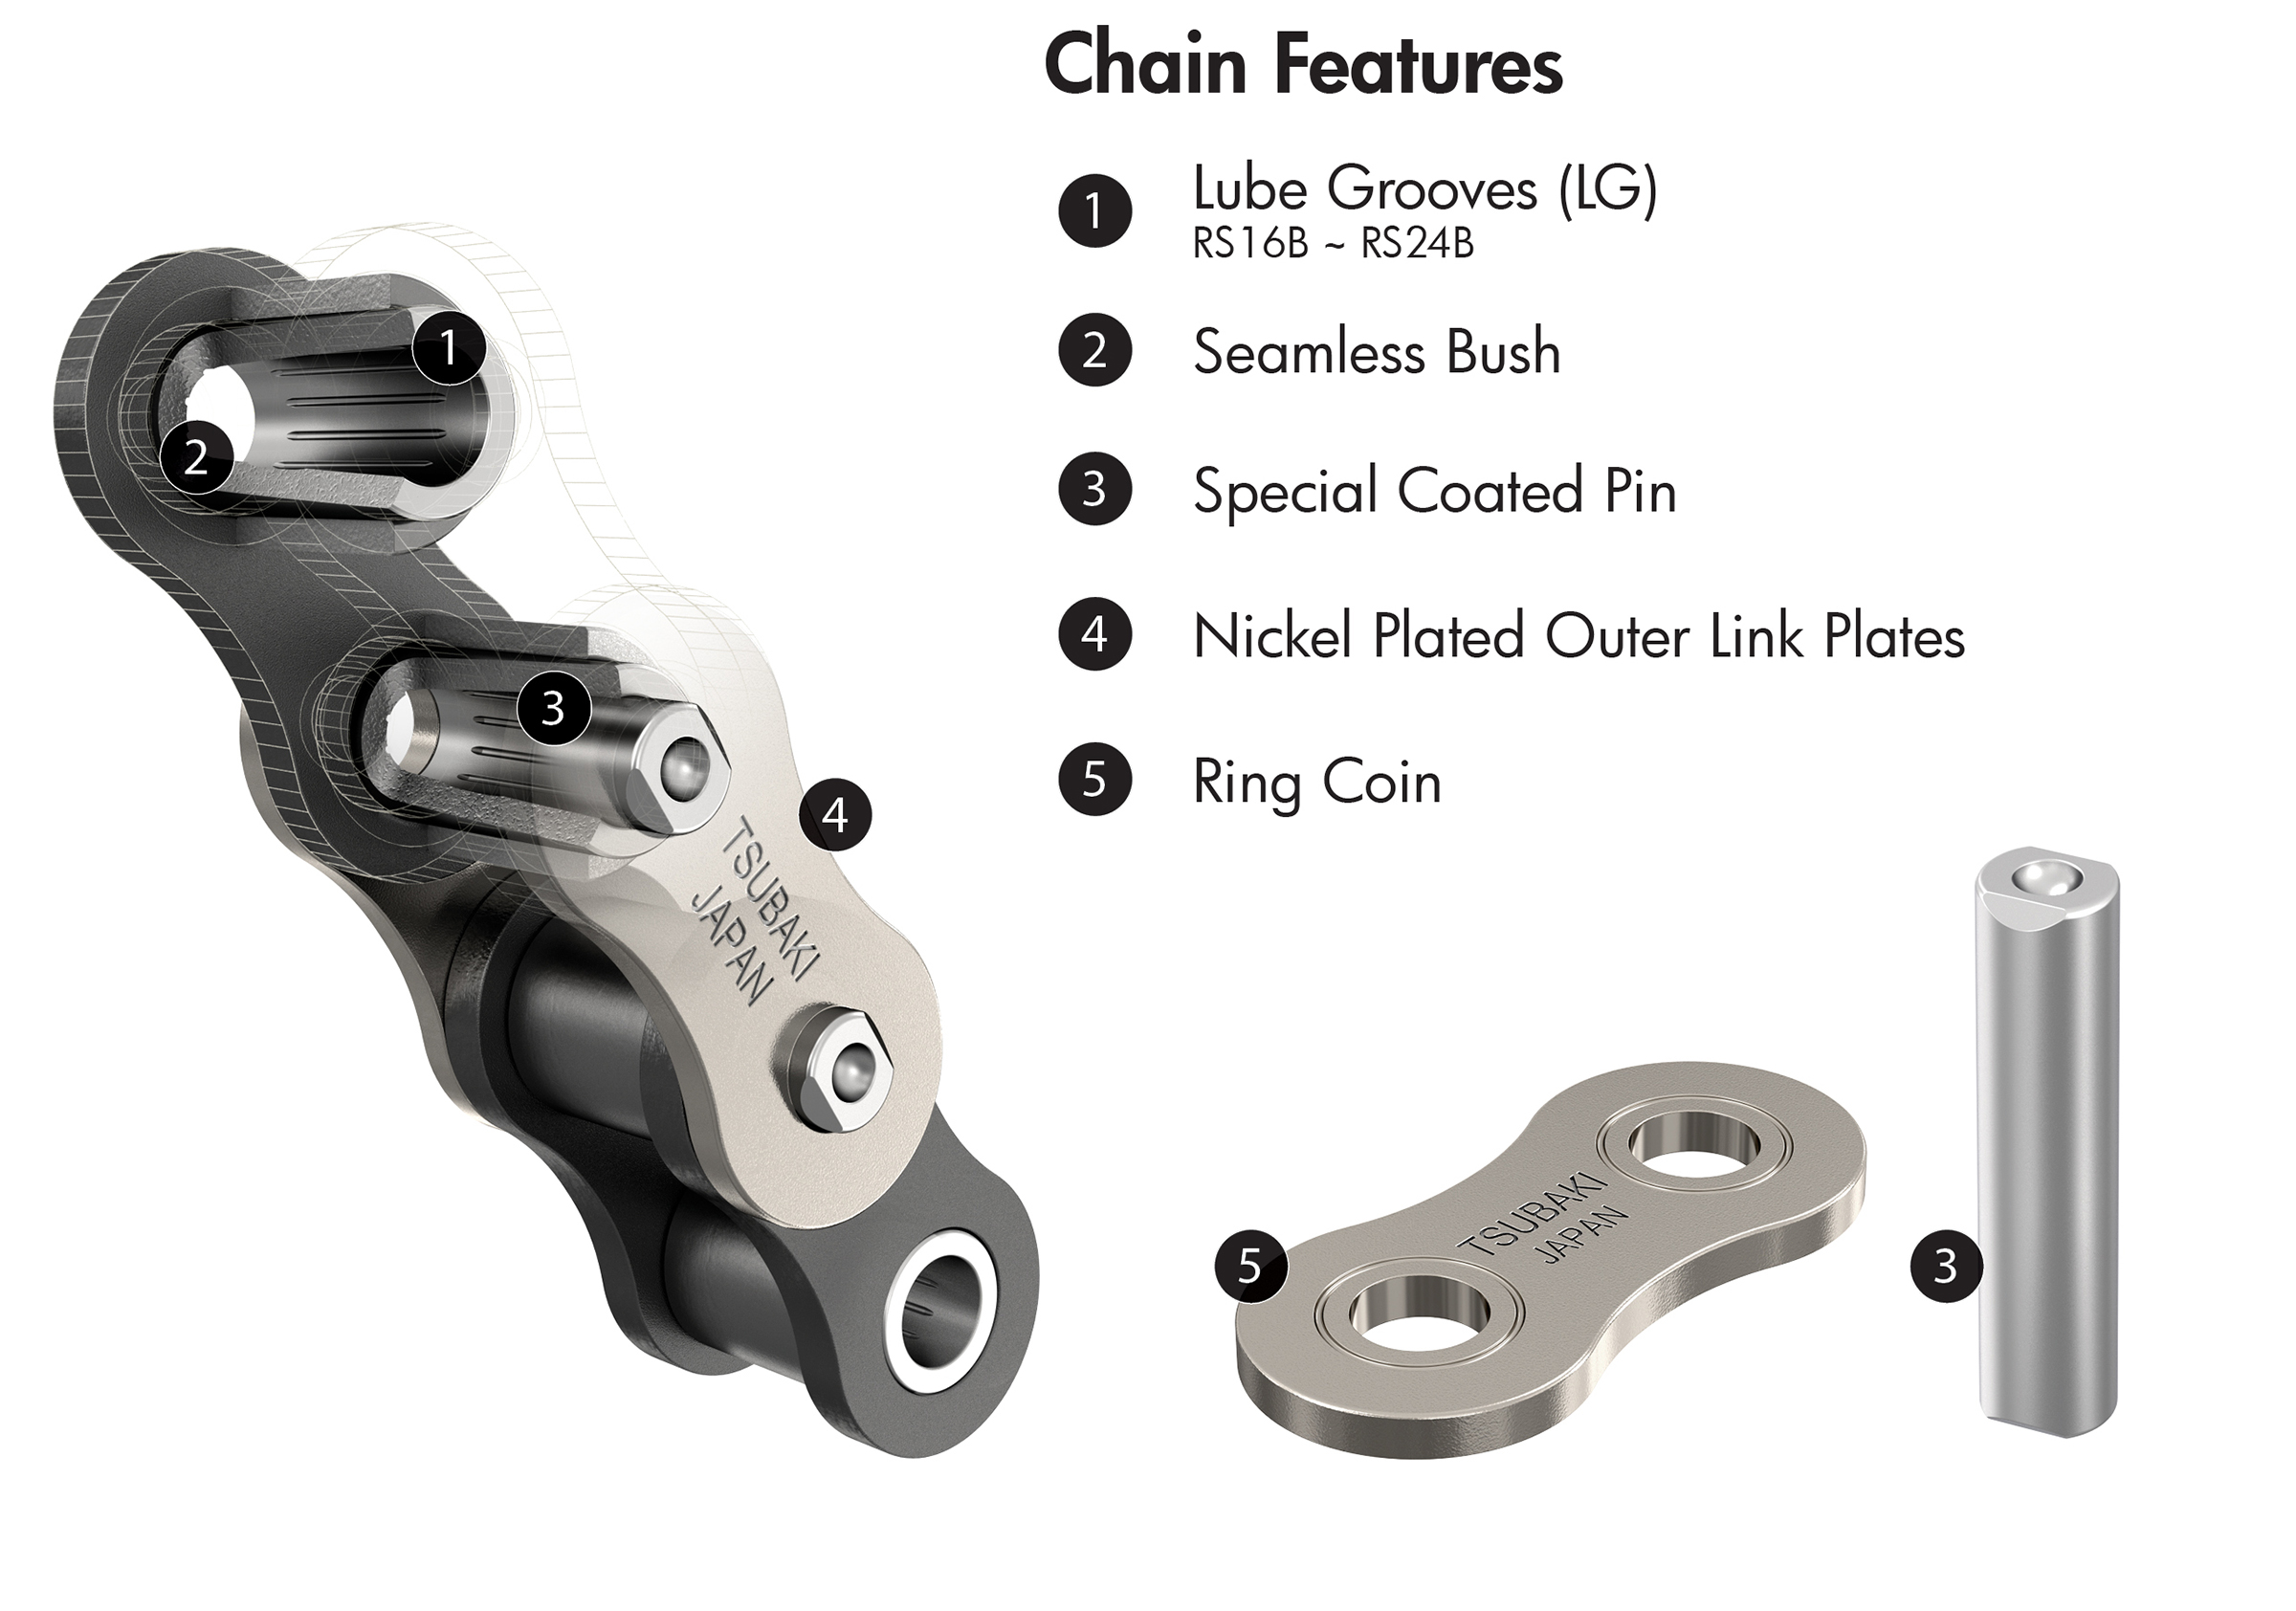 TSUBAKI Titan chain uses seamless bushes that incorporate Lube Grooves. The pins have a special coating that provides an extra hard yet low friction surface, thus helping increase wear life further.